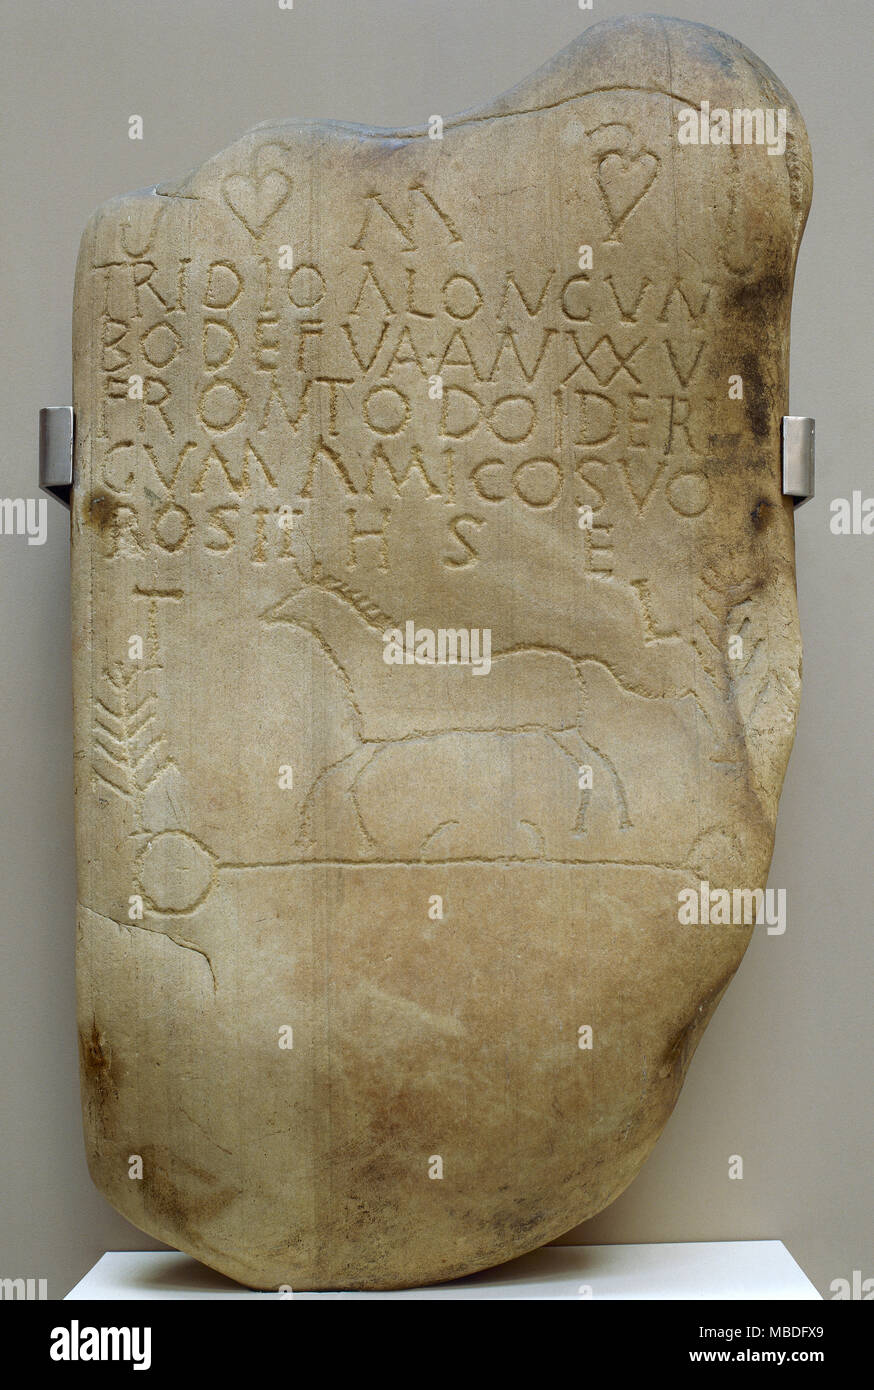 Vadinian tombstone of Tridio Alonge, 2nd-3rd centuries AD. Epitaph inscription in Latin language, In the lower part, a horse on a funerary cart. Quartzite. From Remolina, Spain. Museum of Leon, Castile and Leon, Spain. Stock Photo